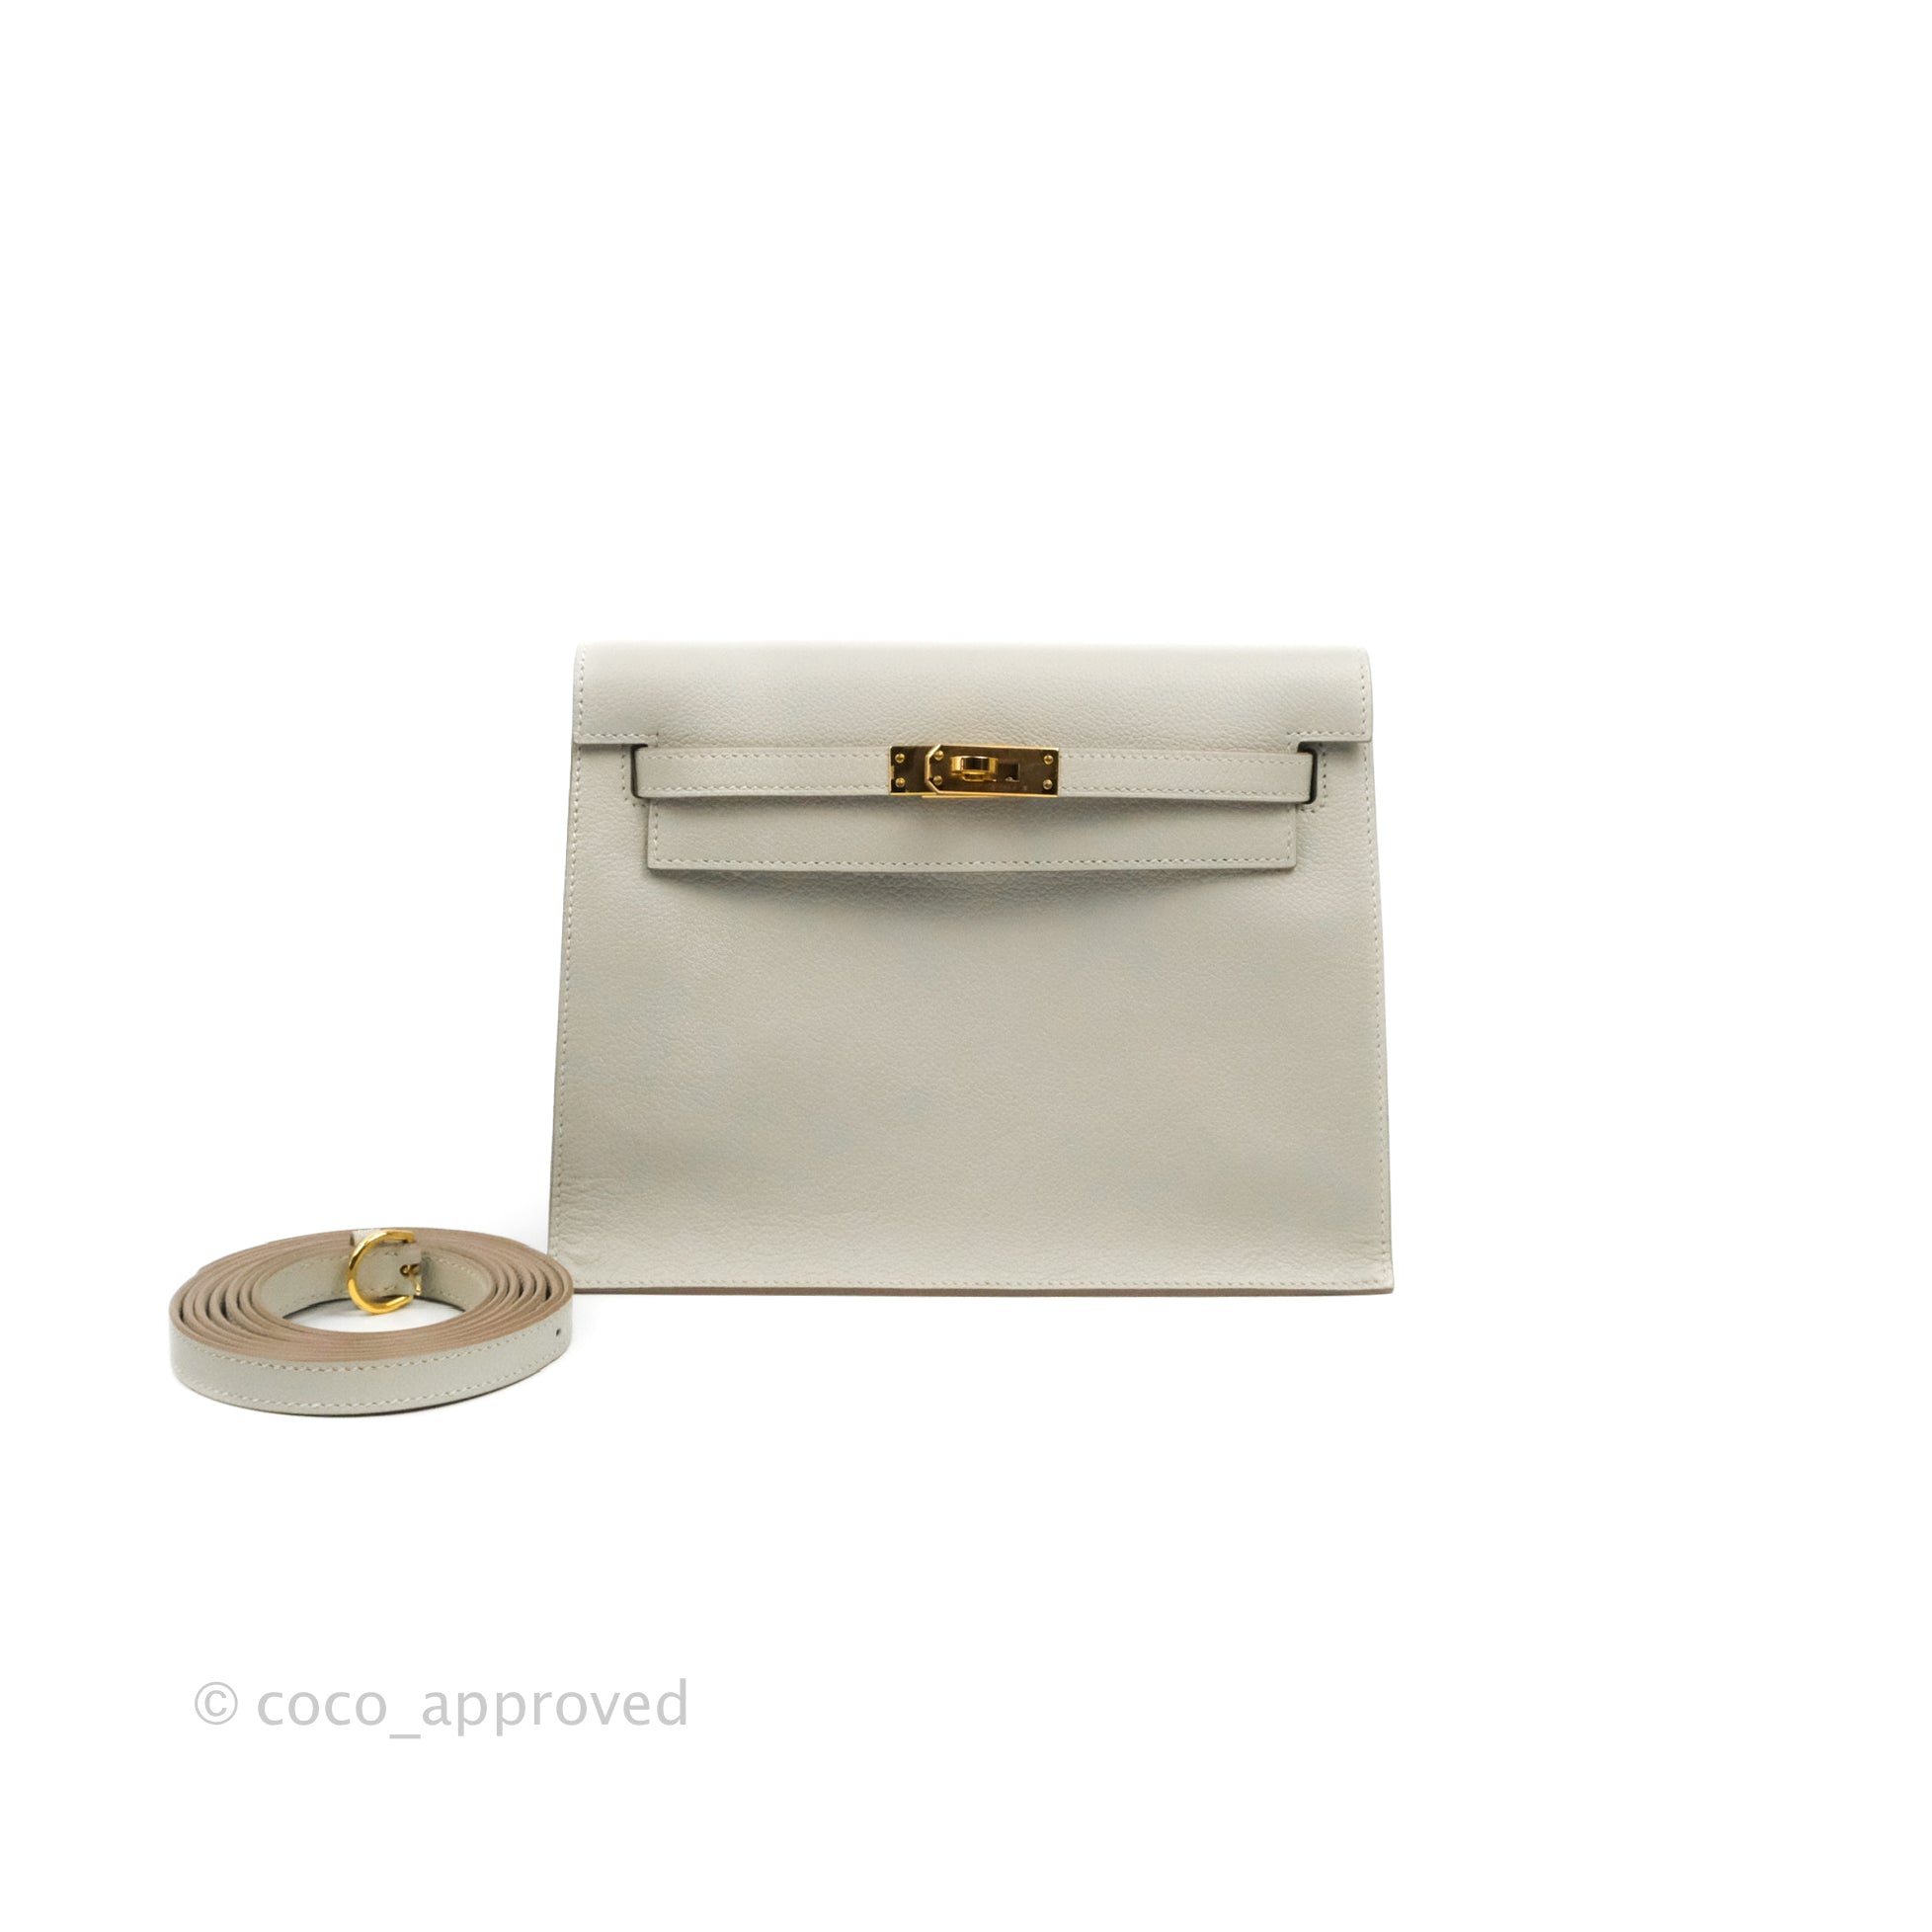 Hermès Kelly Danse II Gris Perle Ostrich with Gold Hardware